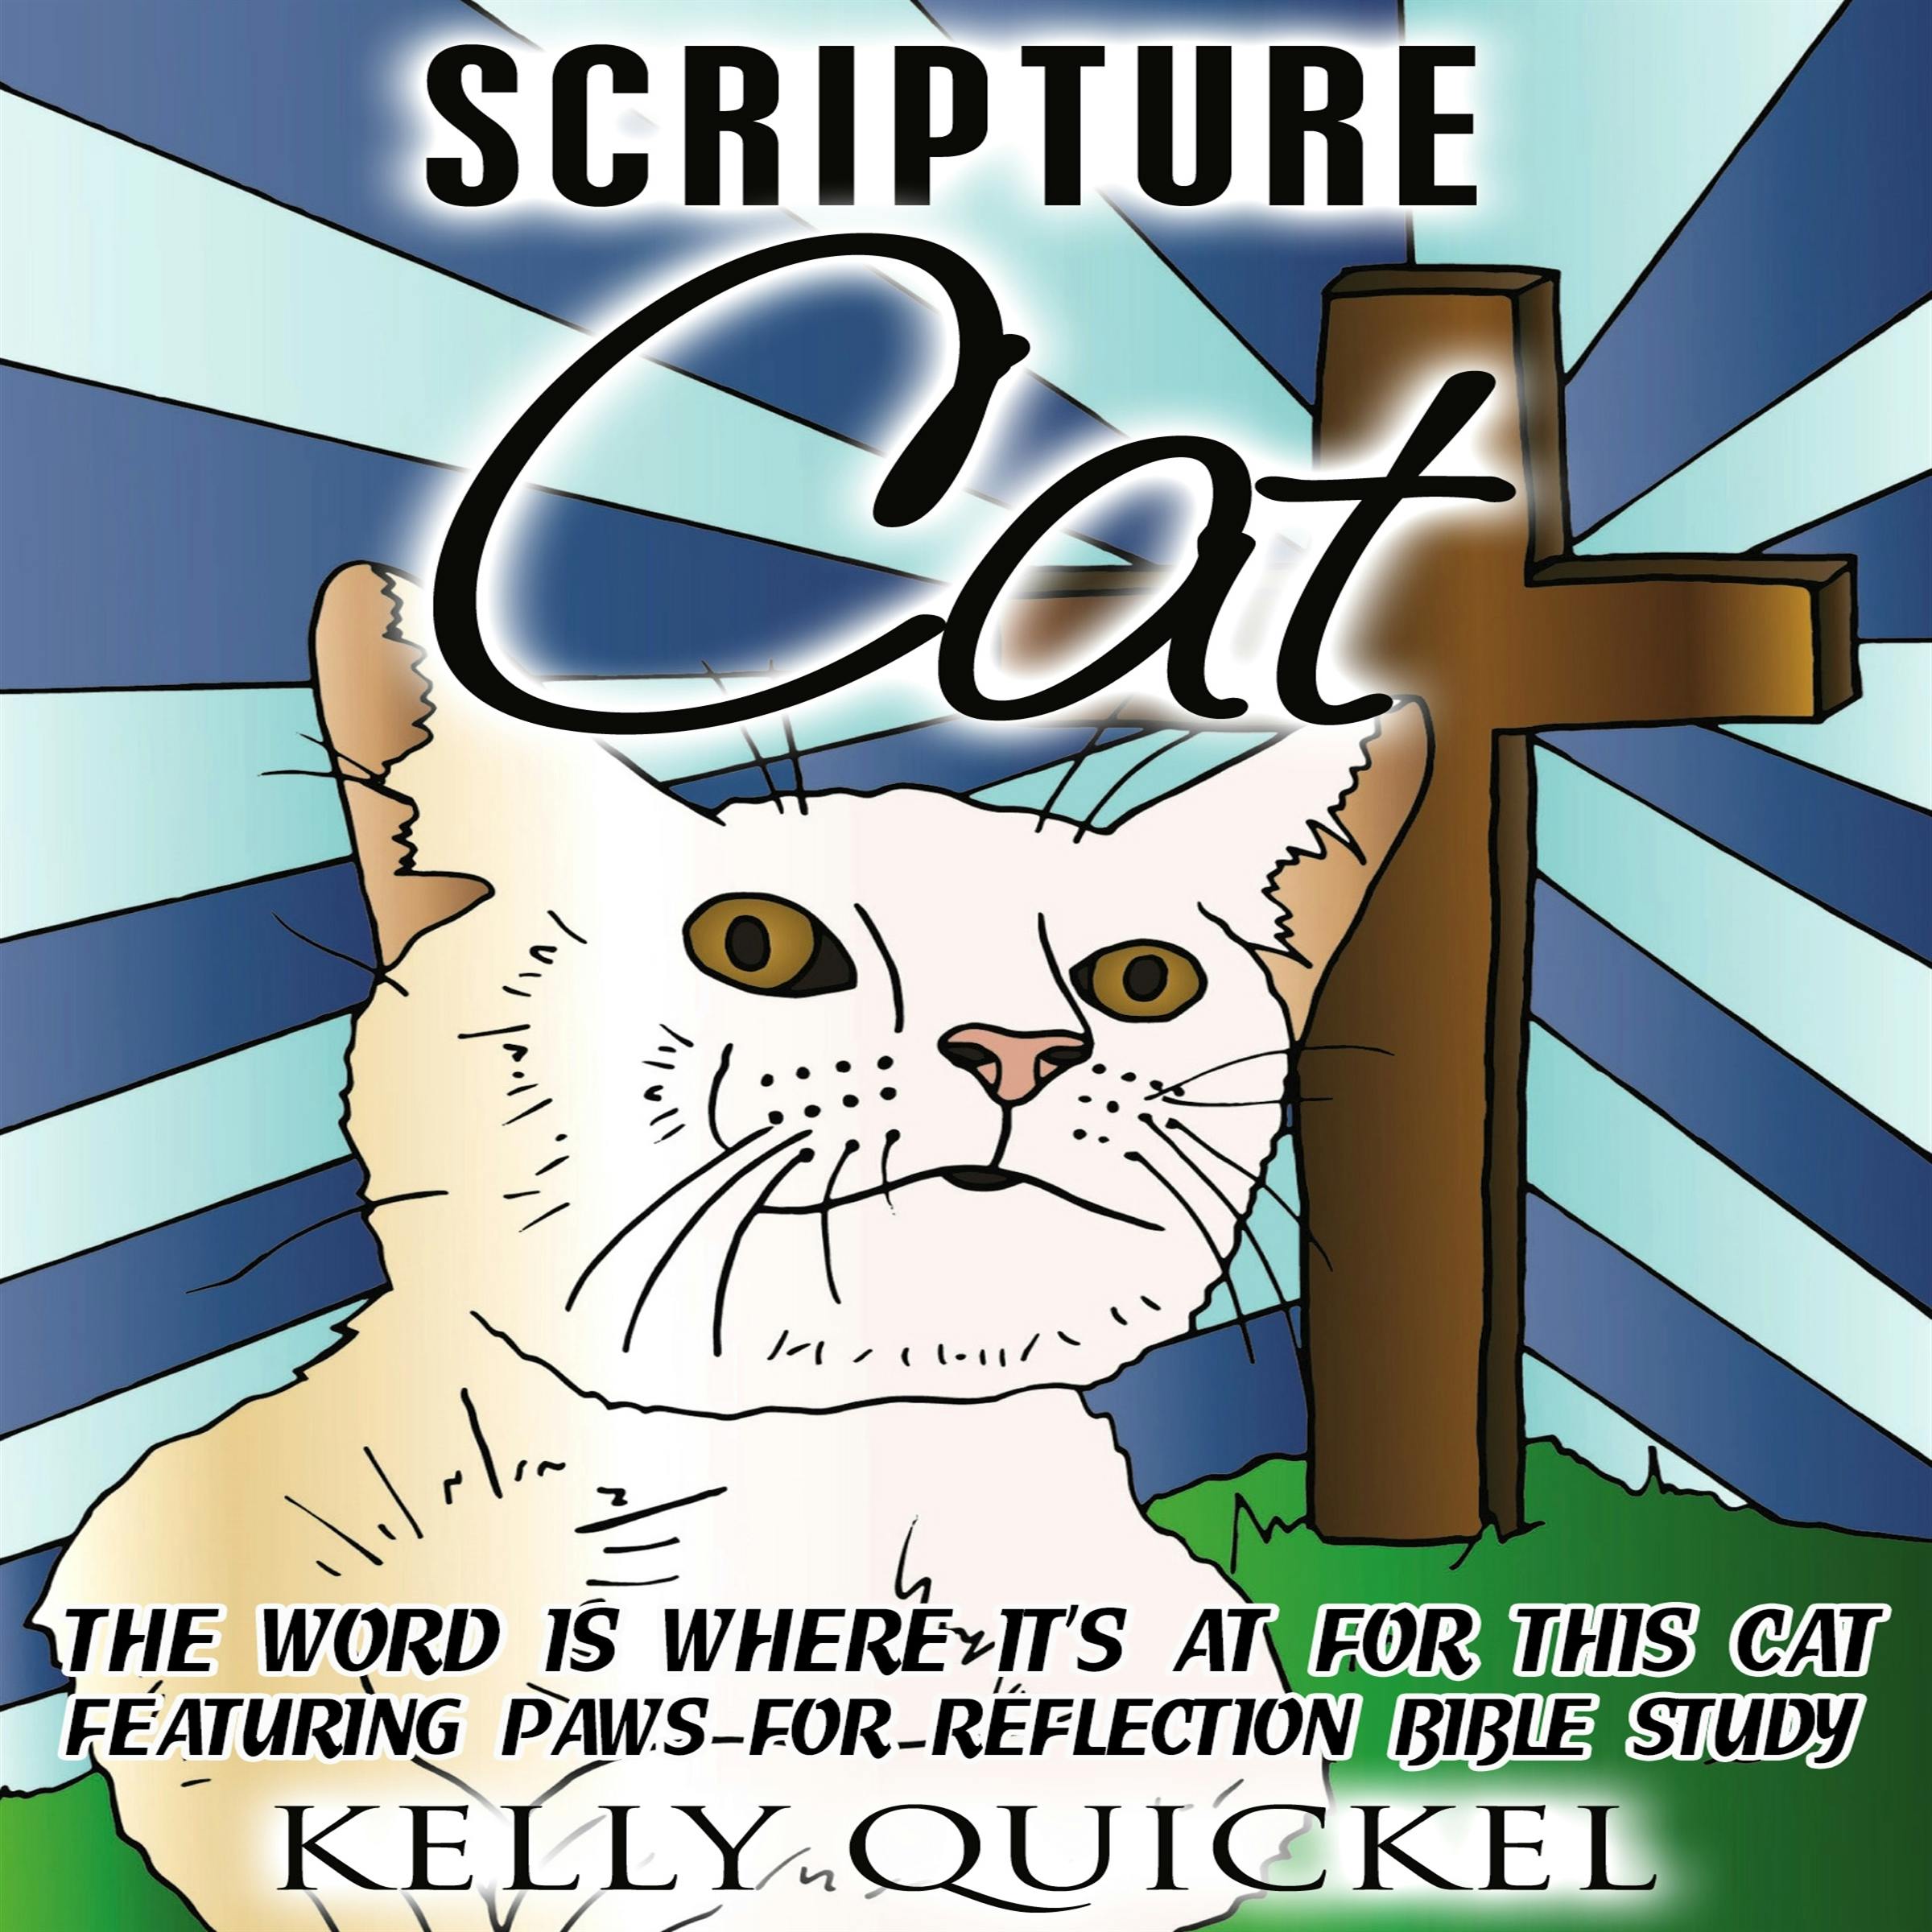 Scripture Cat: The Word Is Where It's At for This Cat, Featuring Paws for Reflection Bible Study - undefined